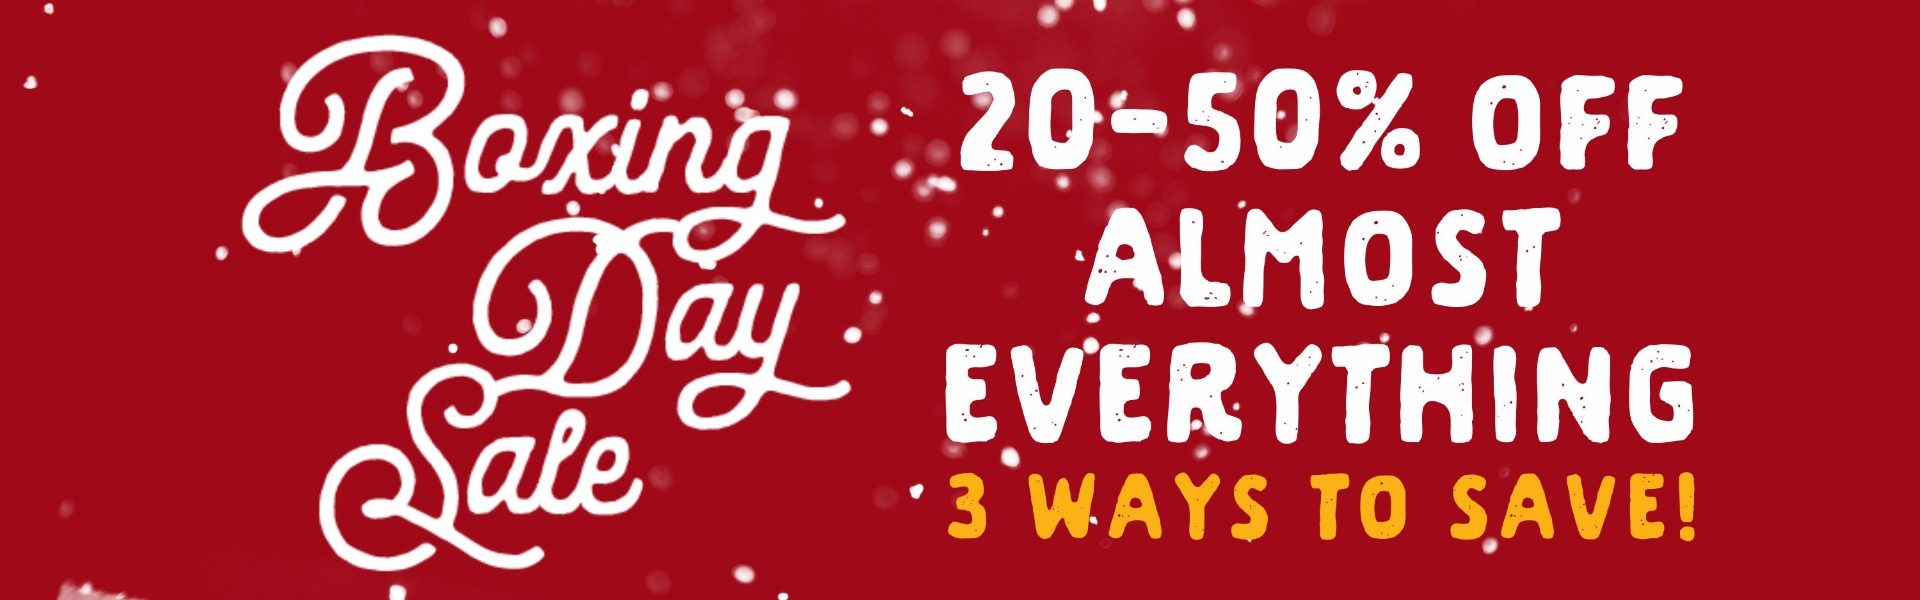 Boxing Day Sale: 20-50% off Almost Everything. 3 Ways to Save!